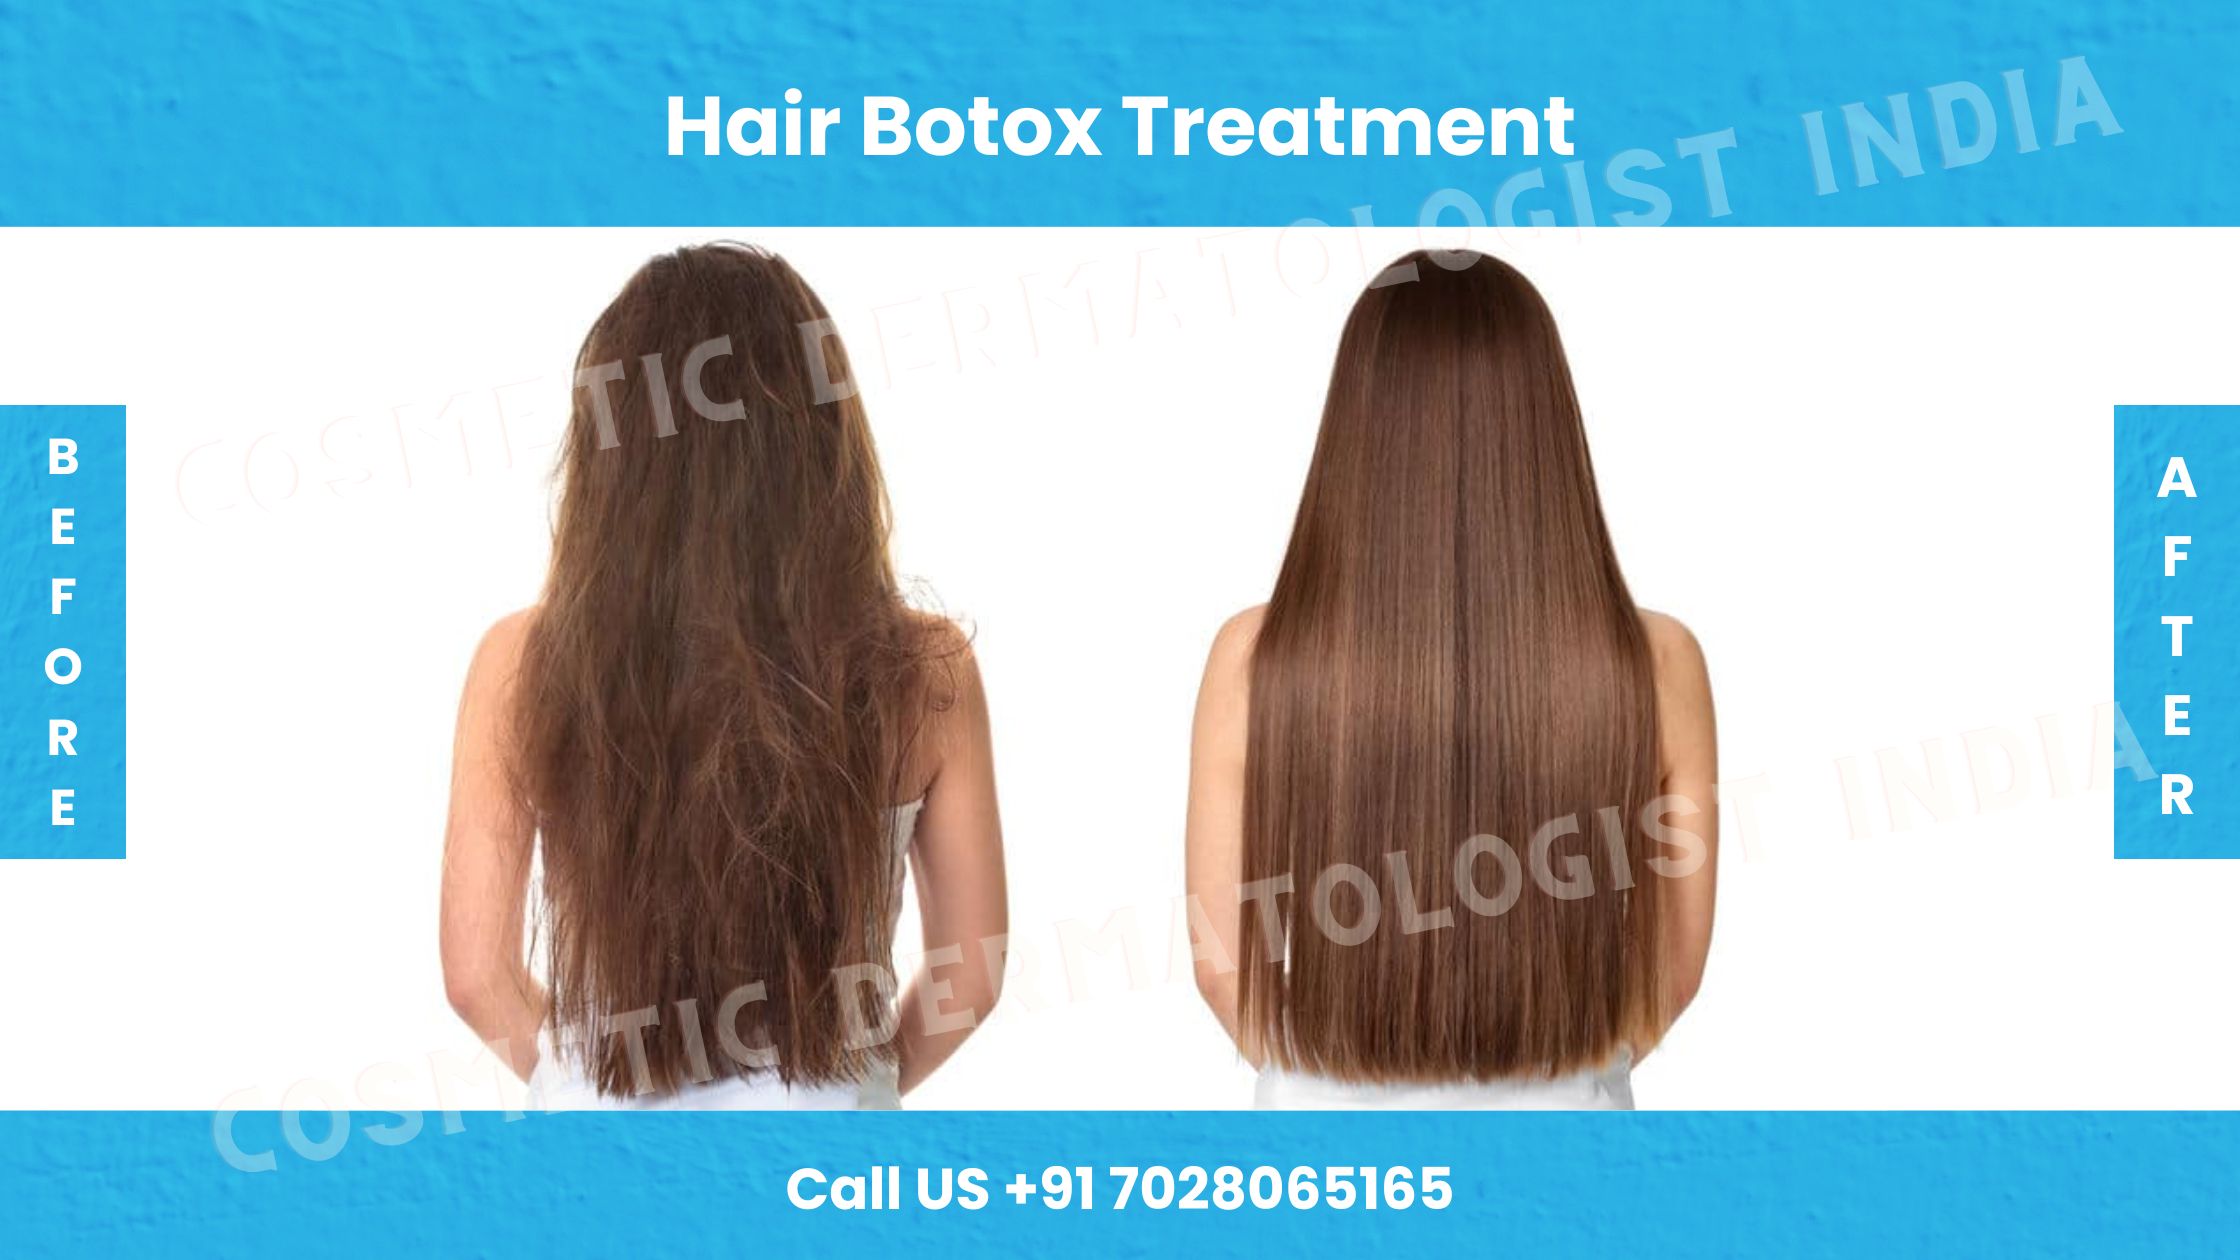 HAIR BOTOX & FILLERS | Top Leading Hair Salon in Singapore and Orchard |  Chez Vous